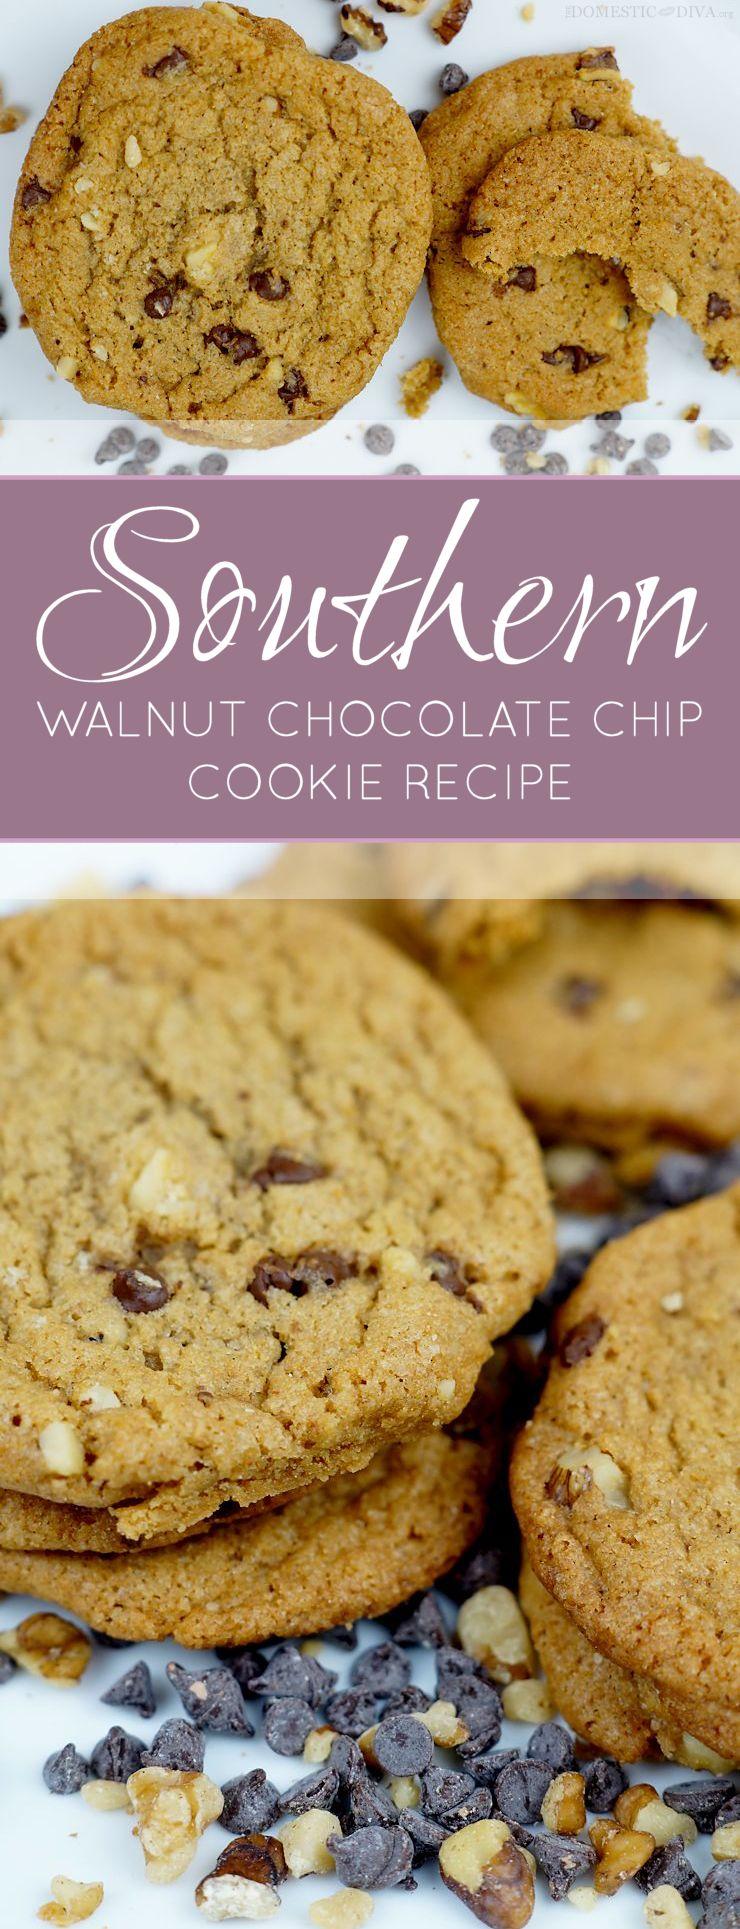 An Incredible Homemade Recipe for Southern Walnut Chocolate Chip Cookies